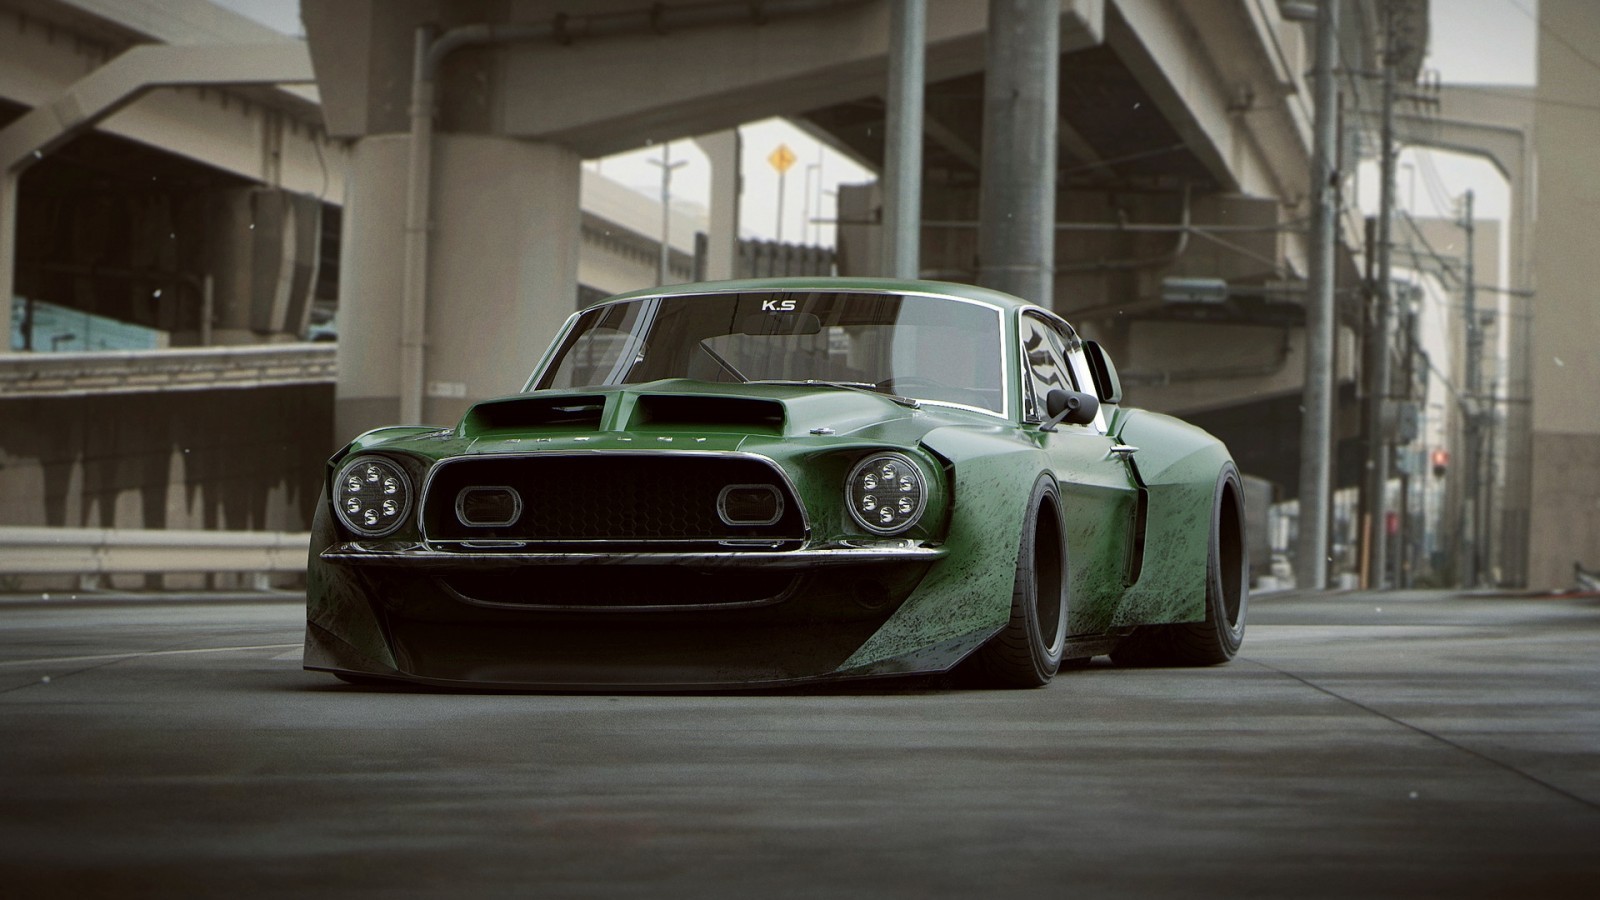 Ford Shelby Gt Tuning, Muscle Cars Body 60s Mustang